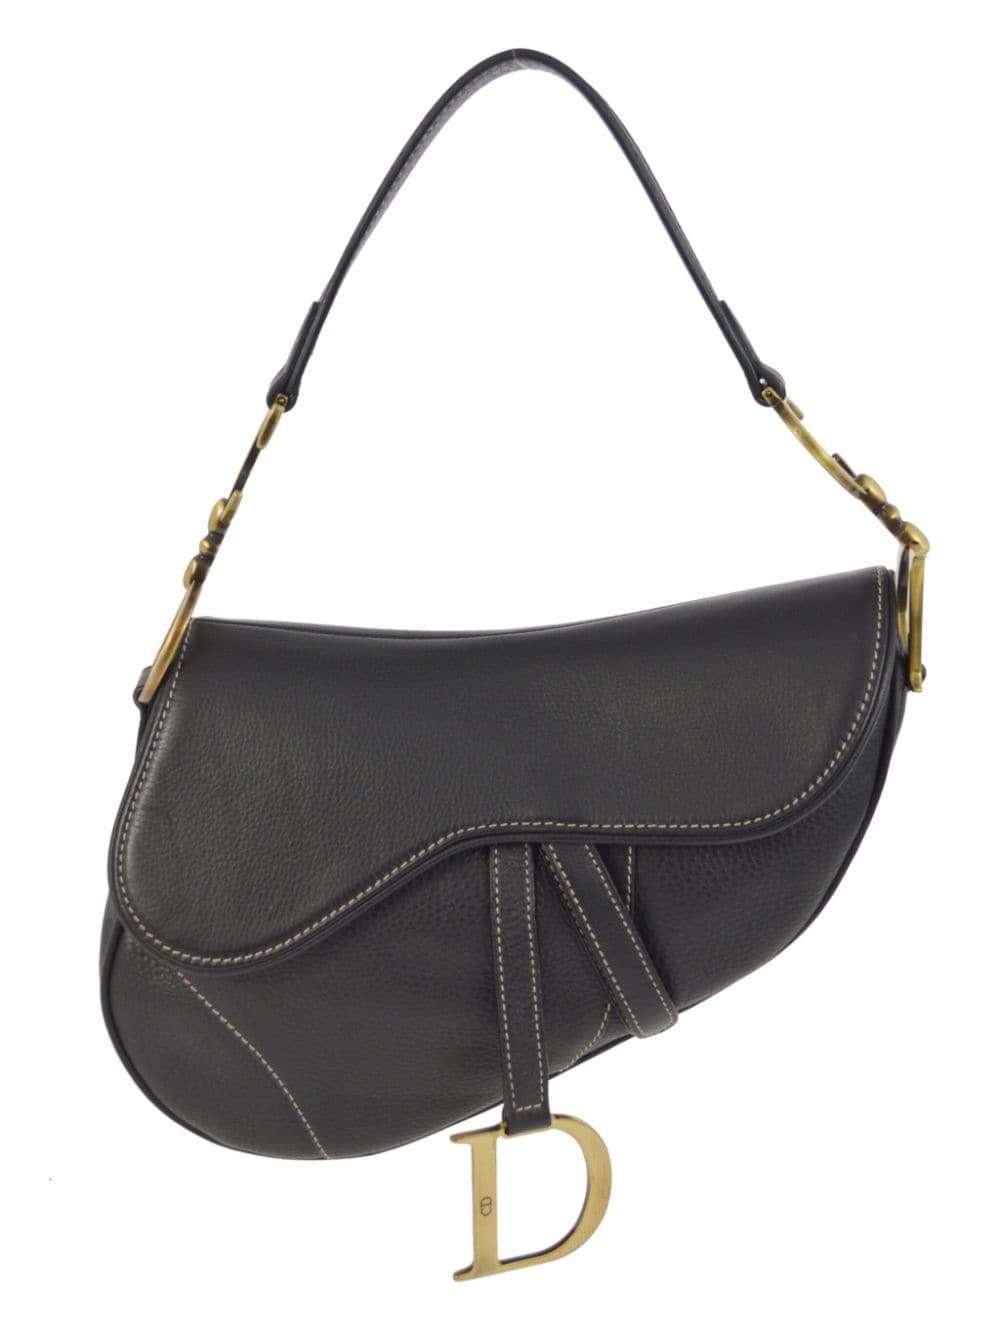 Image 1 of Christian Dior Pre-Owned sac à main Saddle pre-owned (2002)